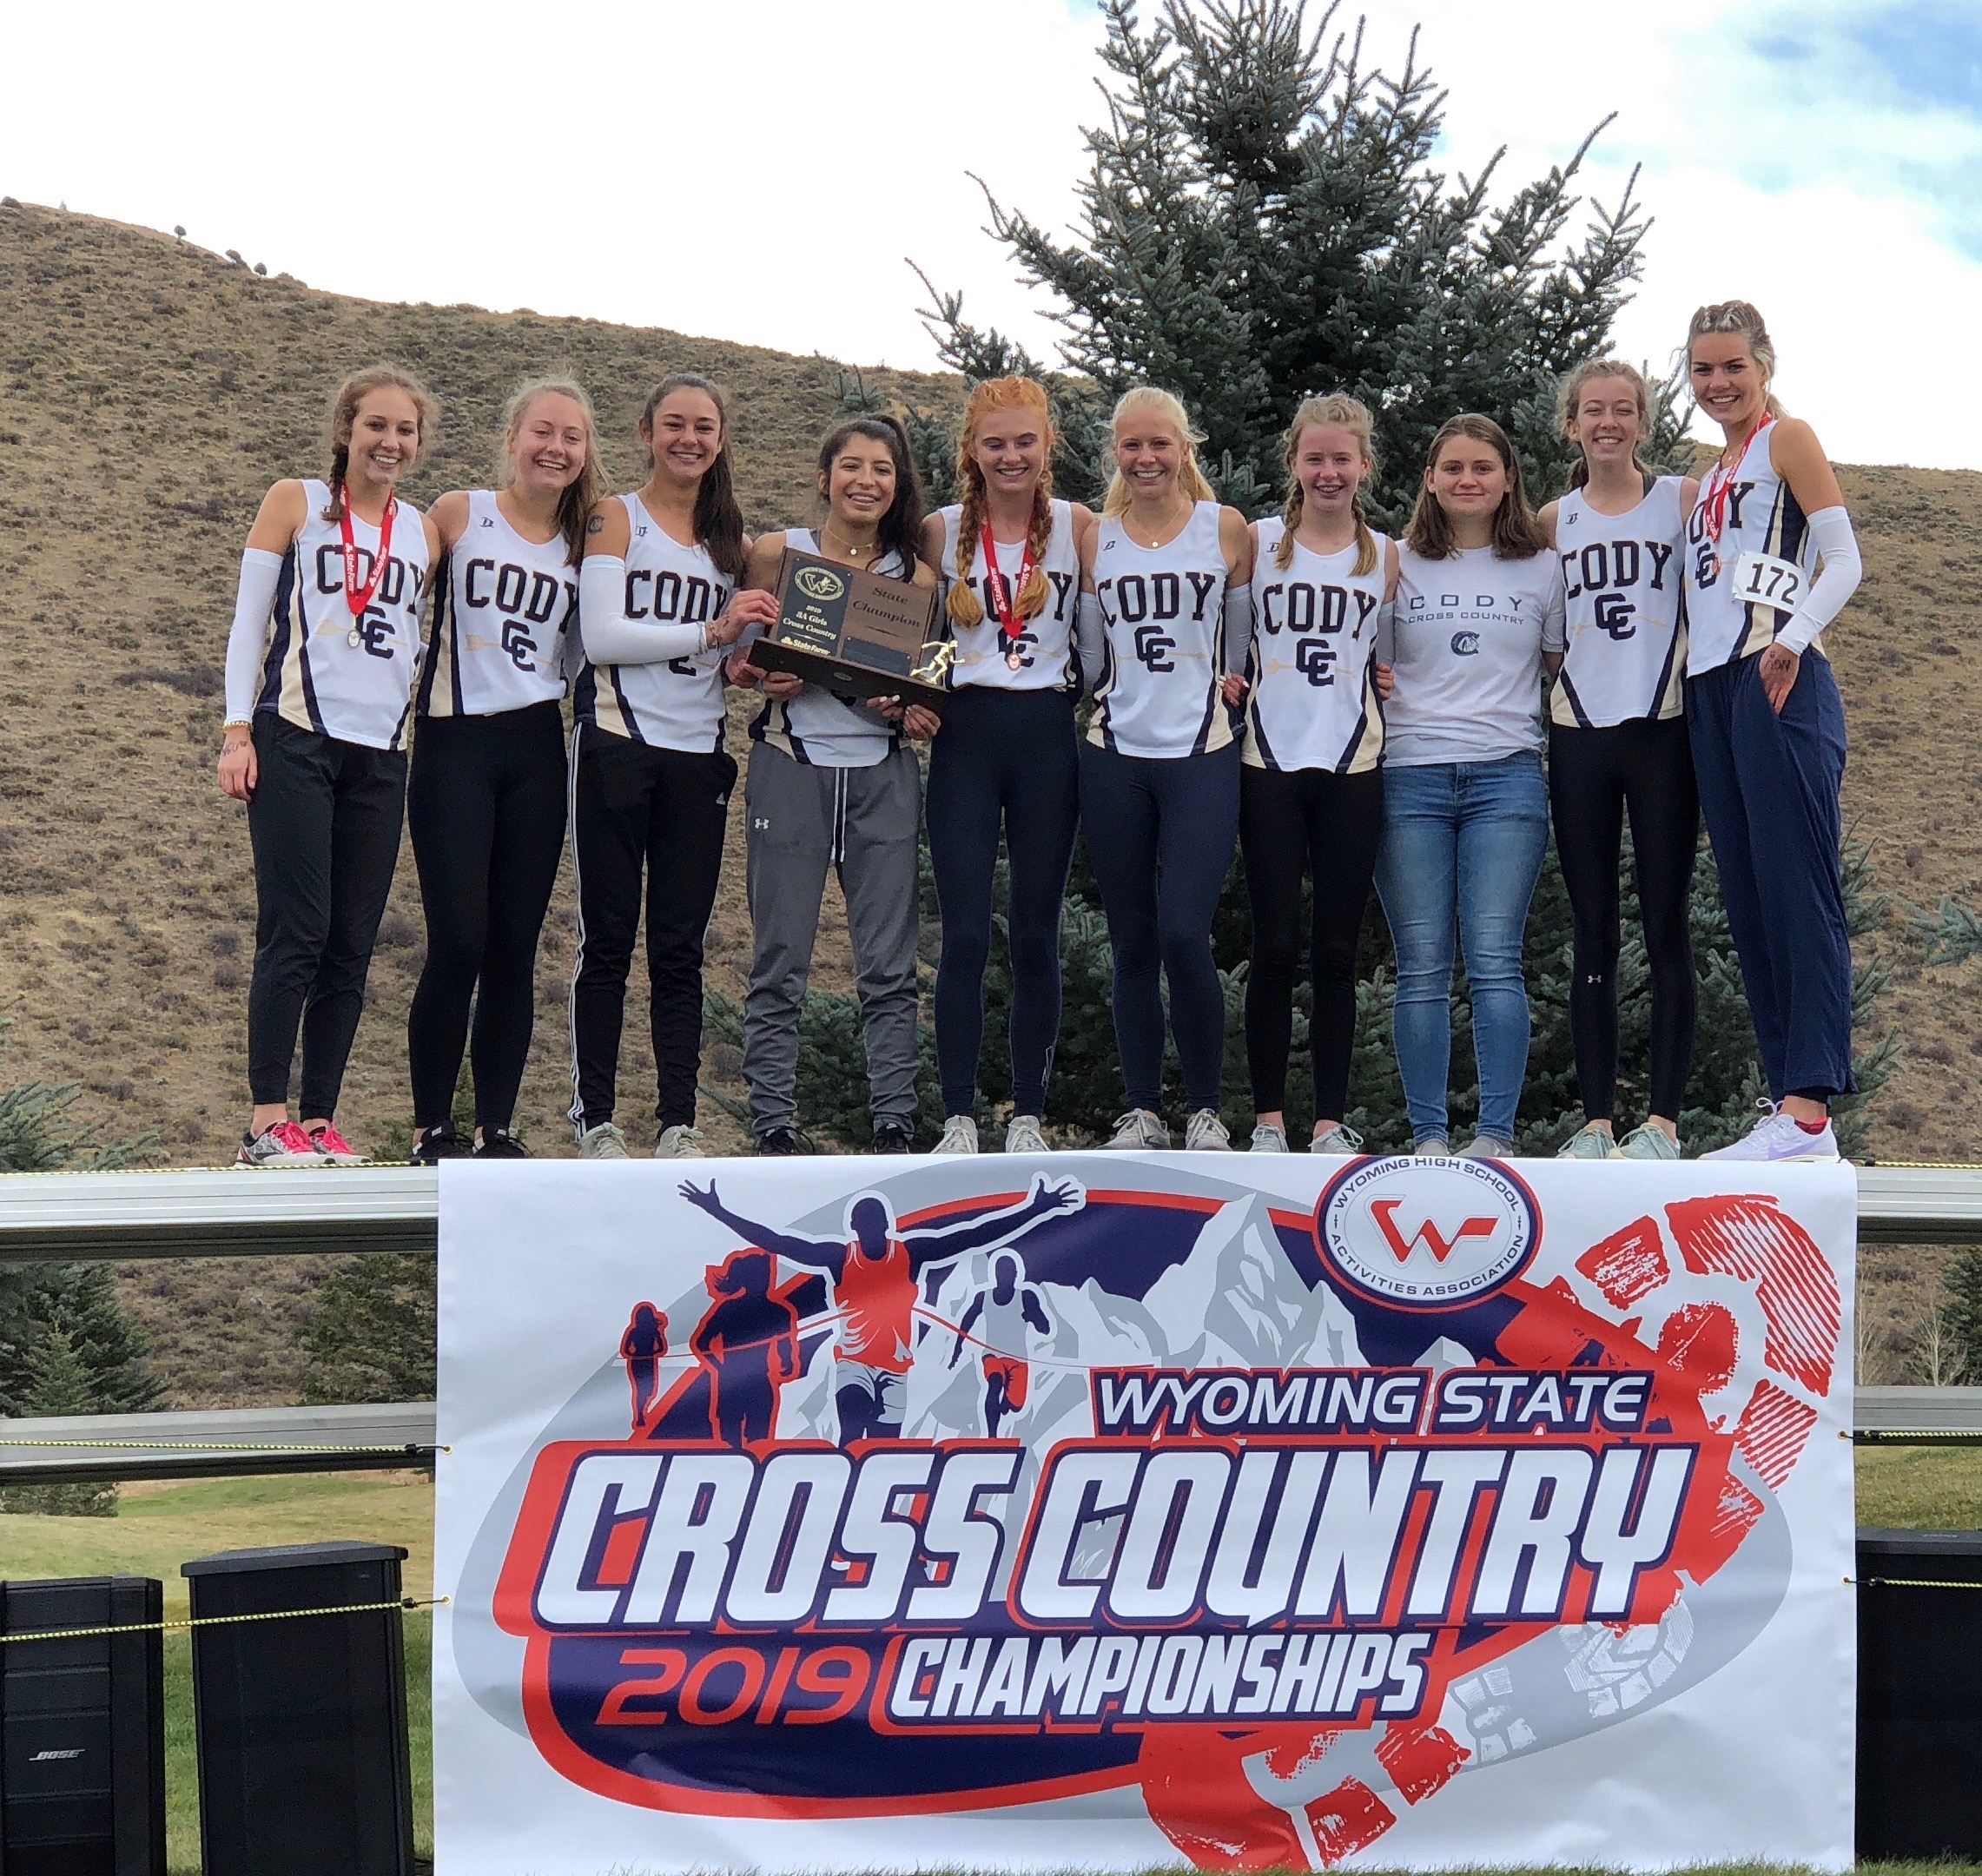 Wyoming State Cross Country 2019 Championships